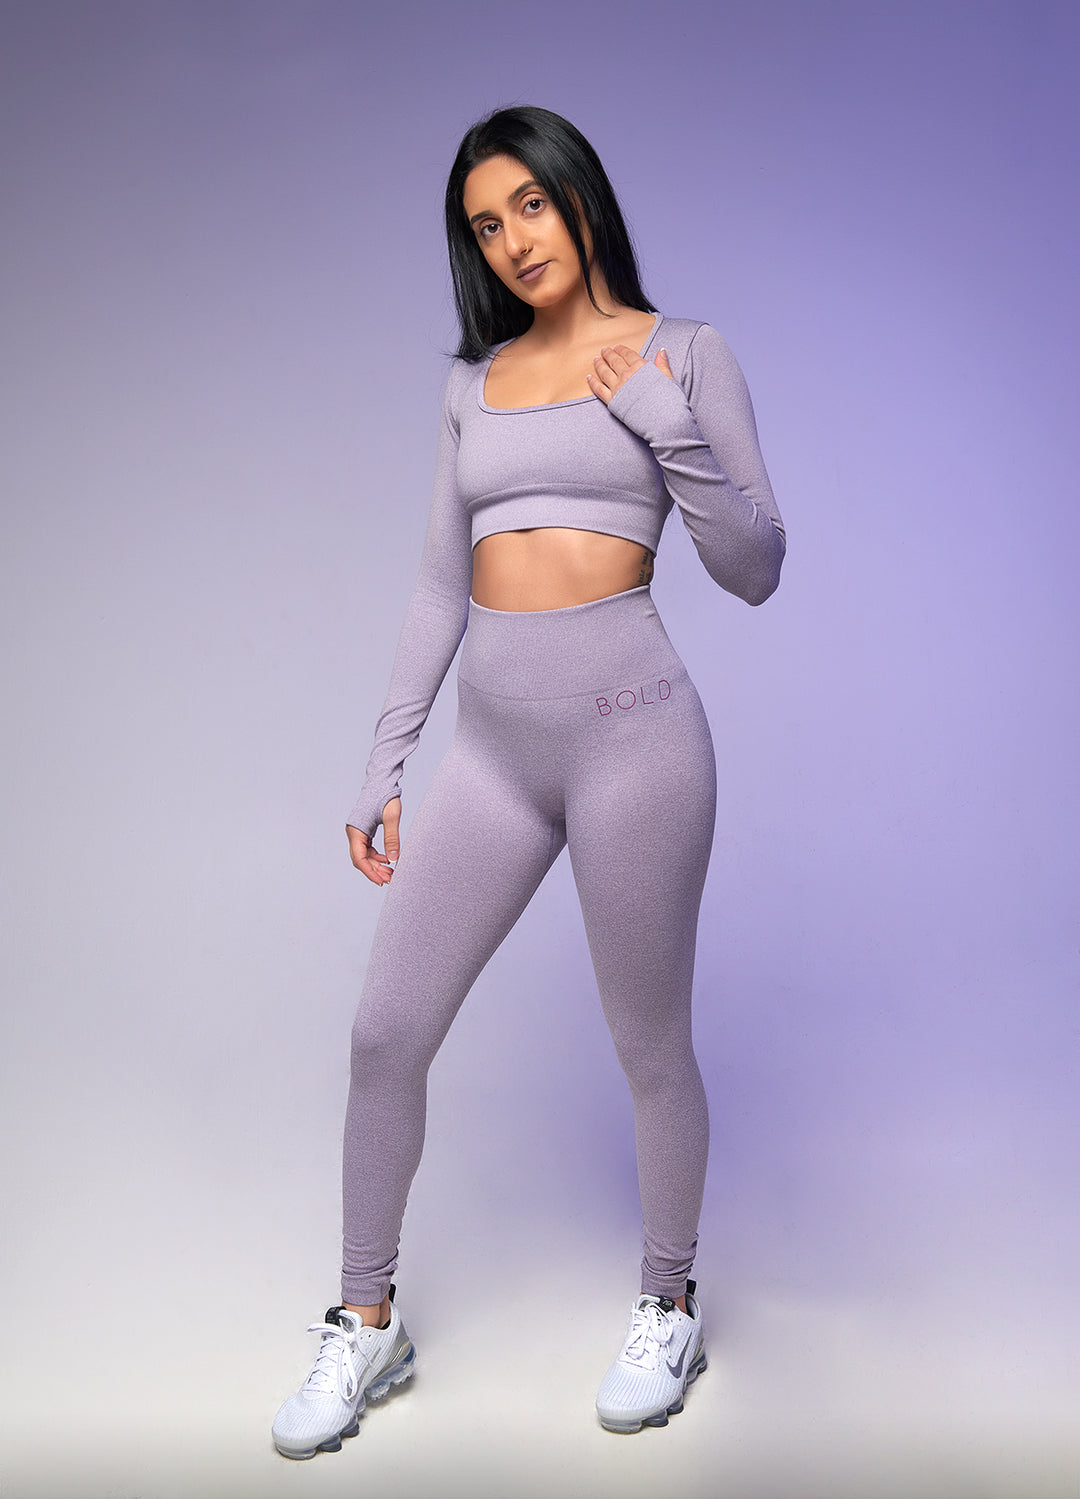 BOLD Orchid Seamless Set